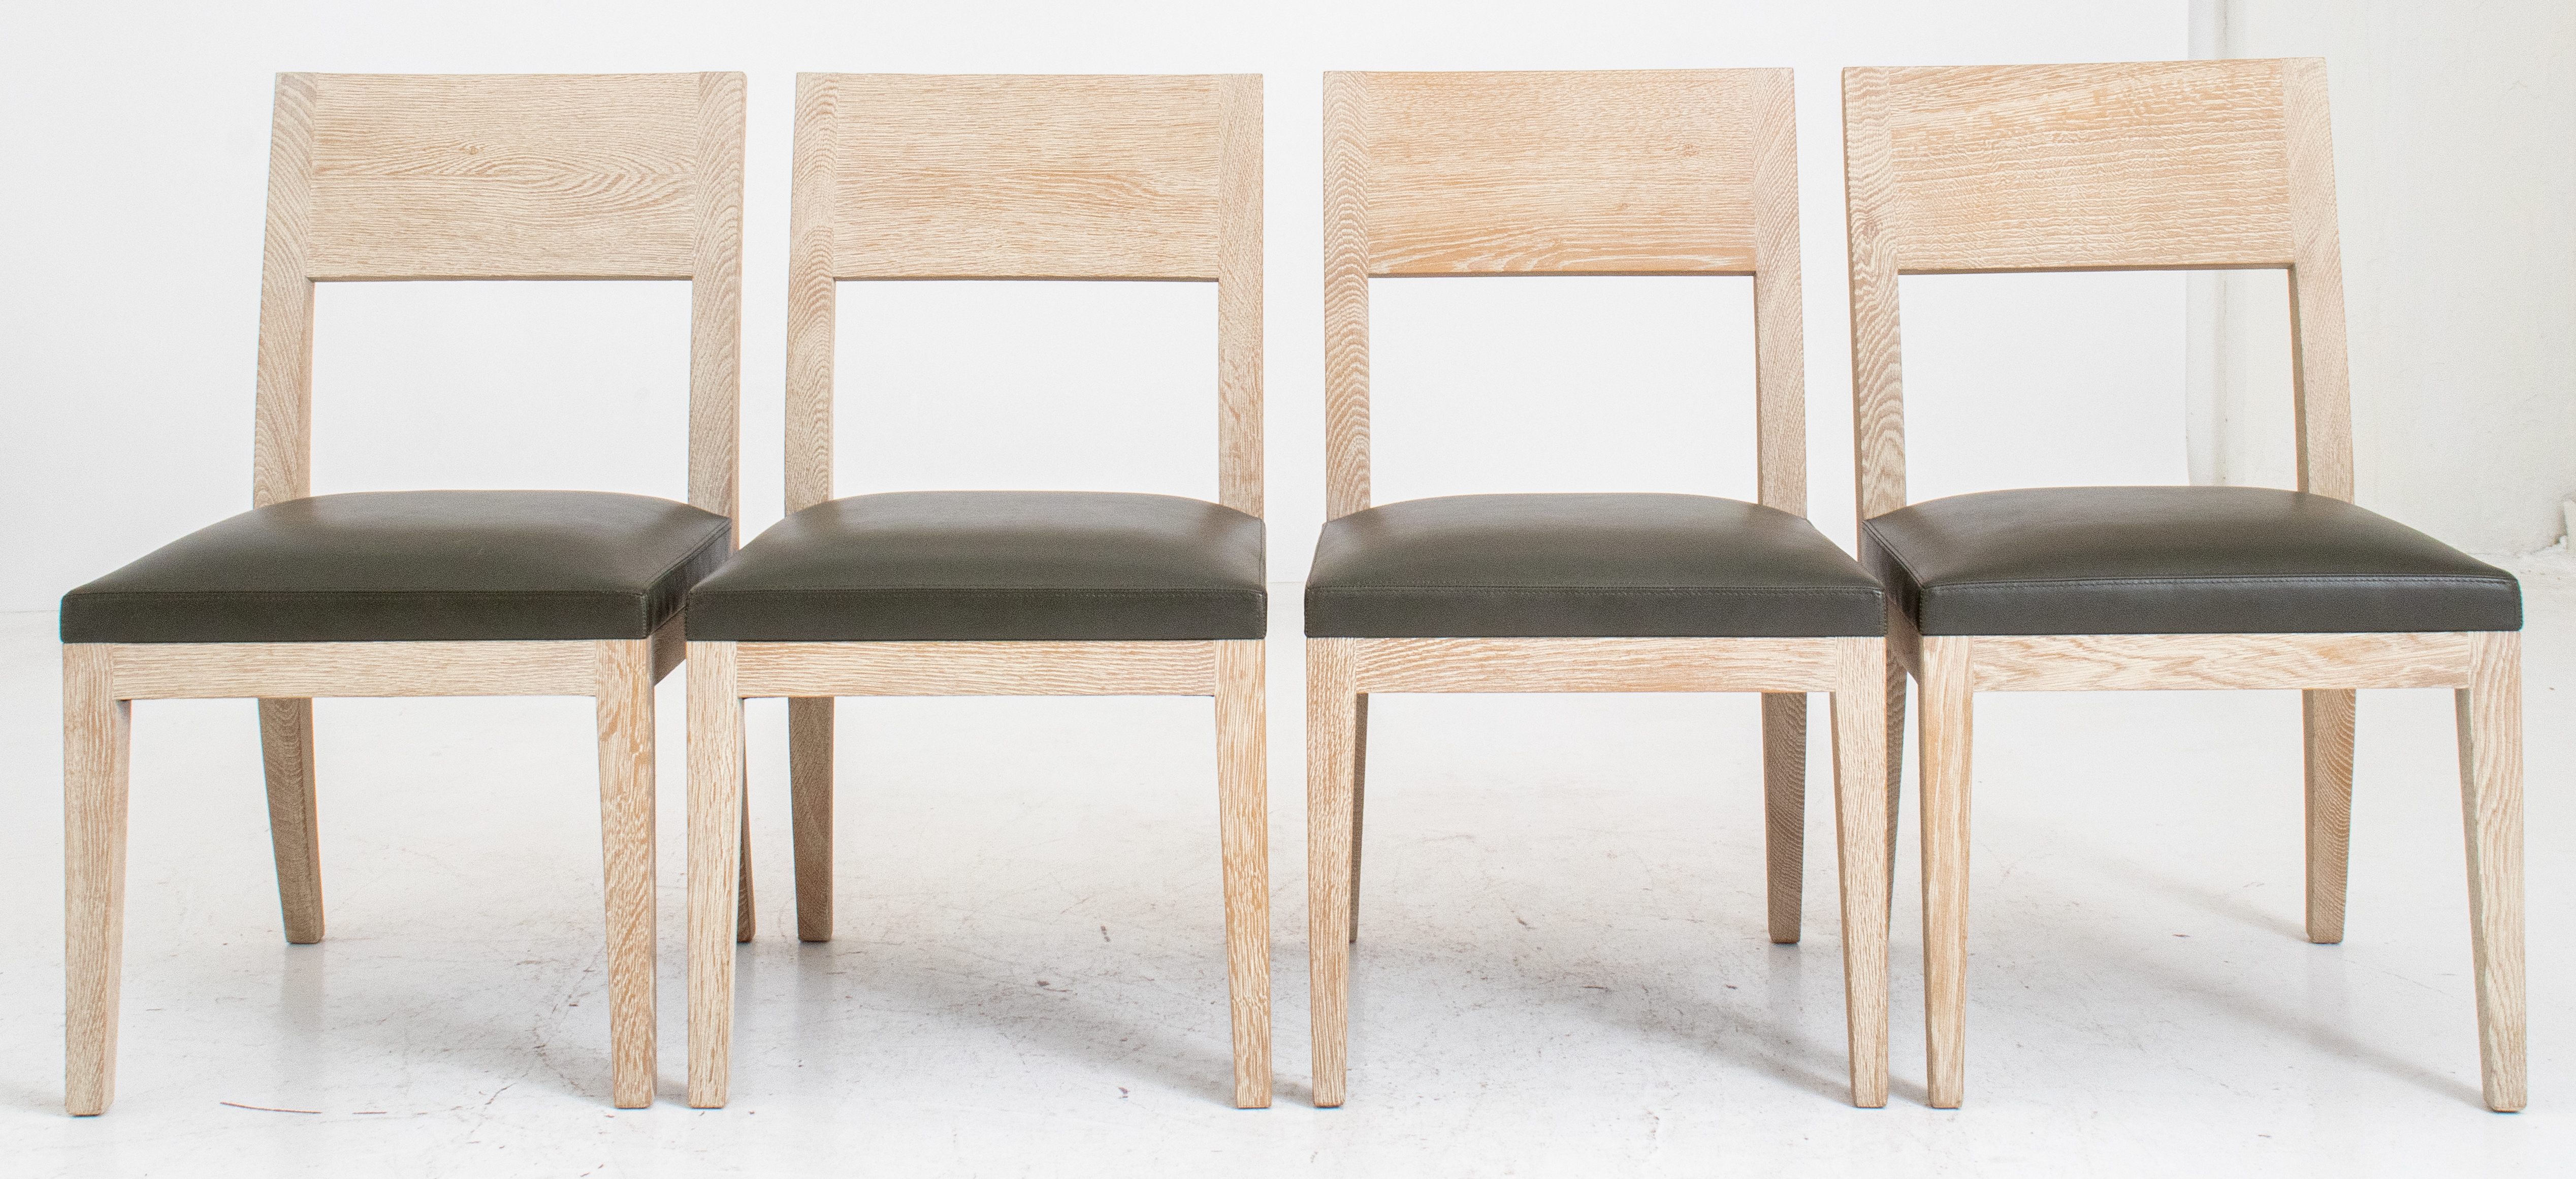 CHRISTIAN LIAIGRE CERUSED OAK CHAIRS  2be1a2